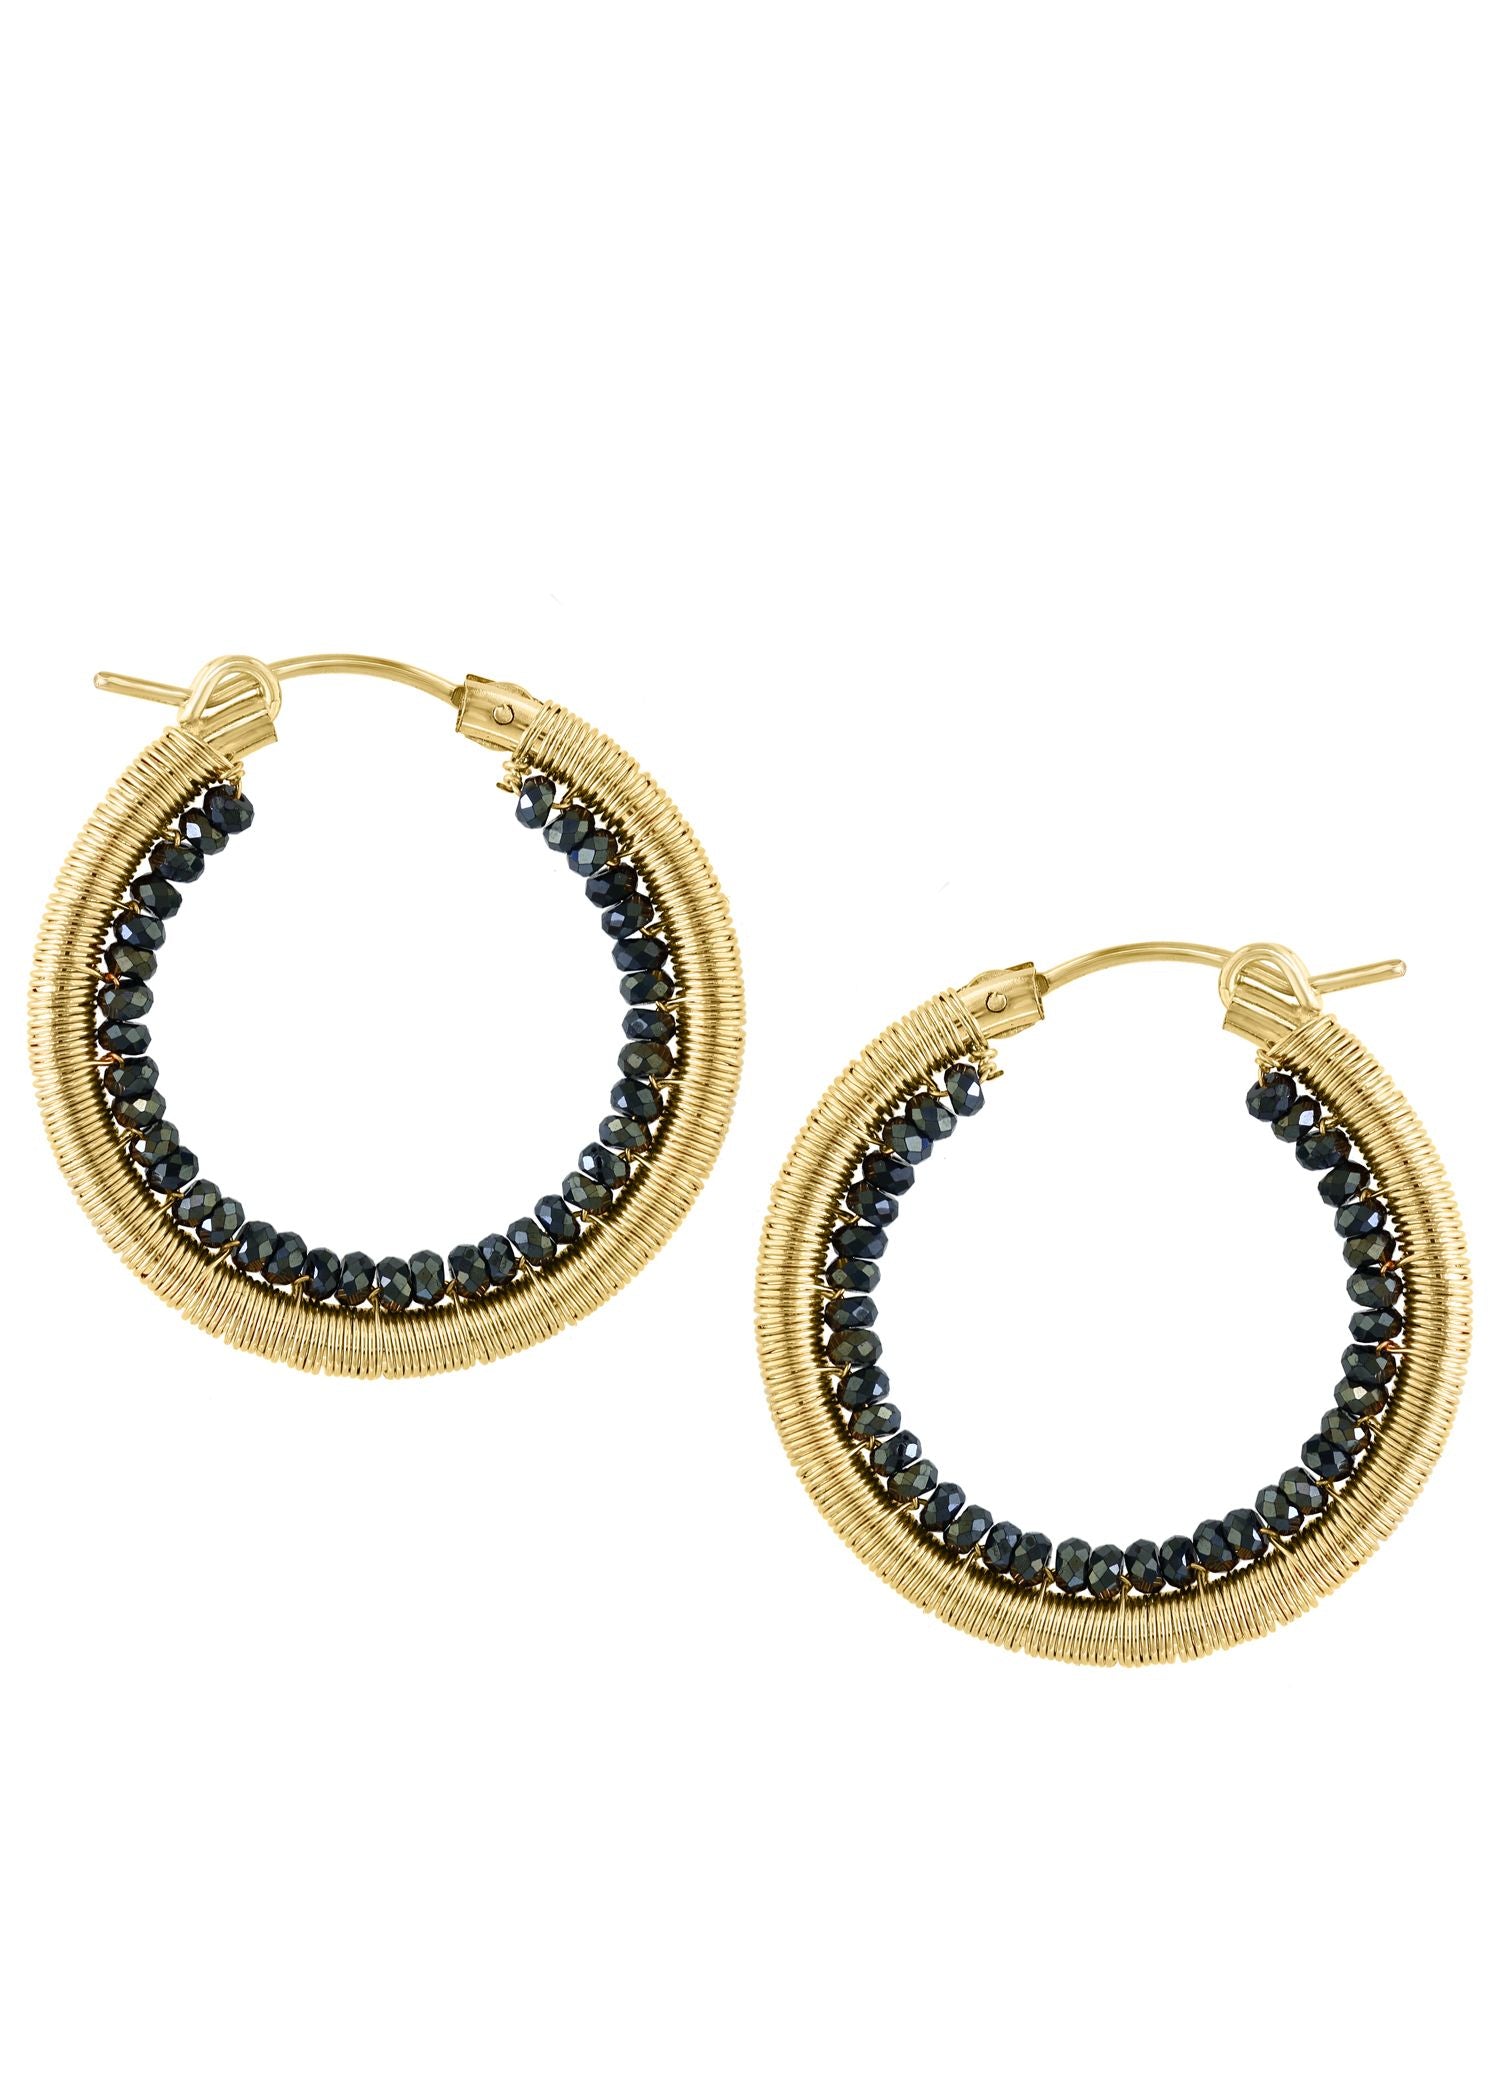 Black spinel 14k gold fill Earrings measure 1-1/8"in length and 1-1/16" in width Handmade in our Los Angeles studio